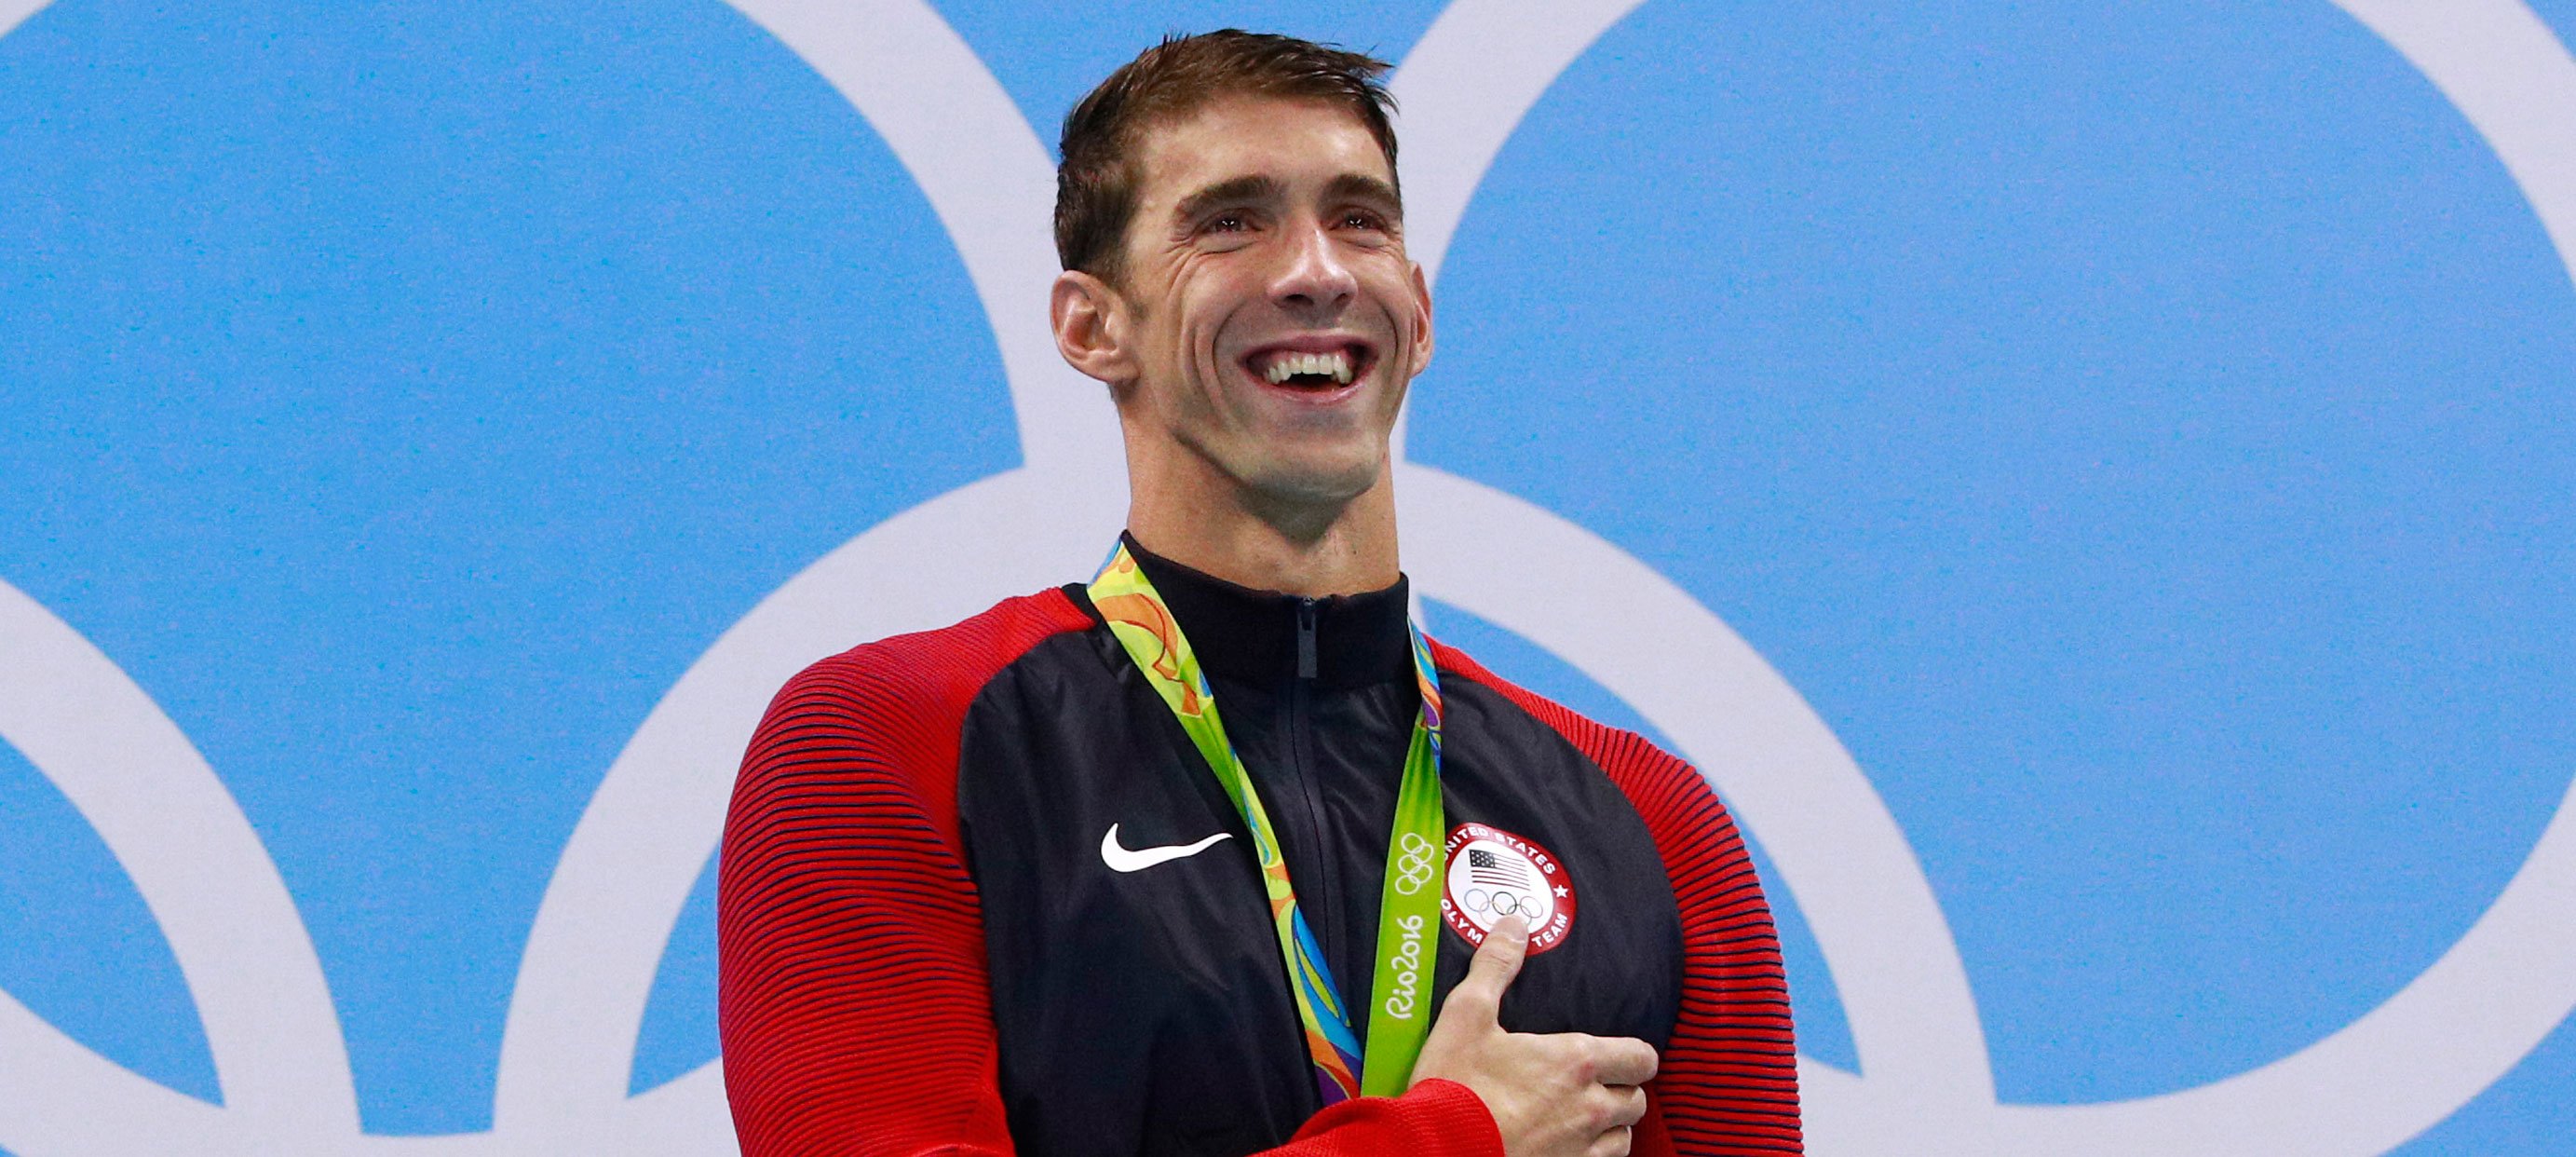 Michael Phelps Spends His First Day of Retirement With Son